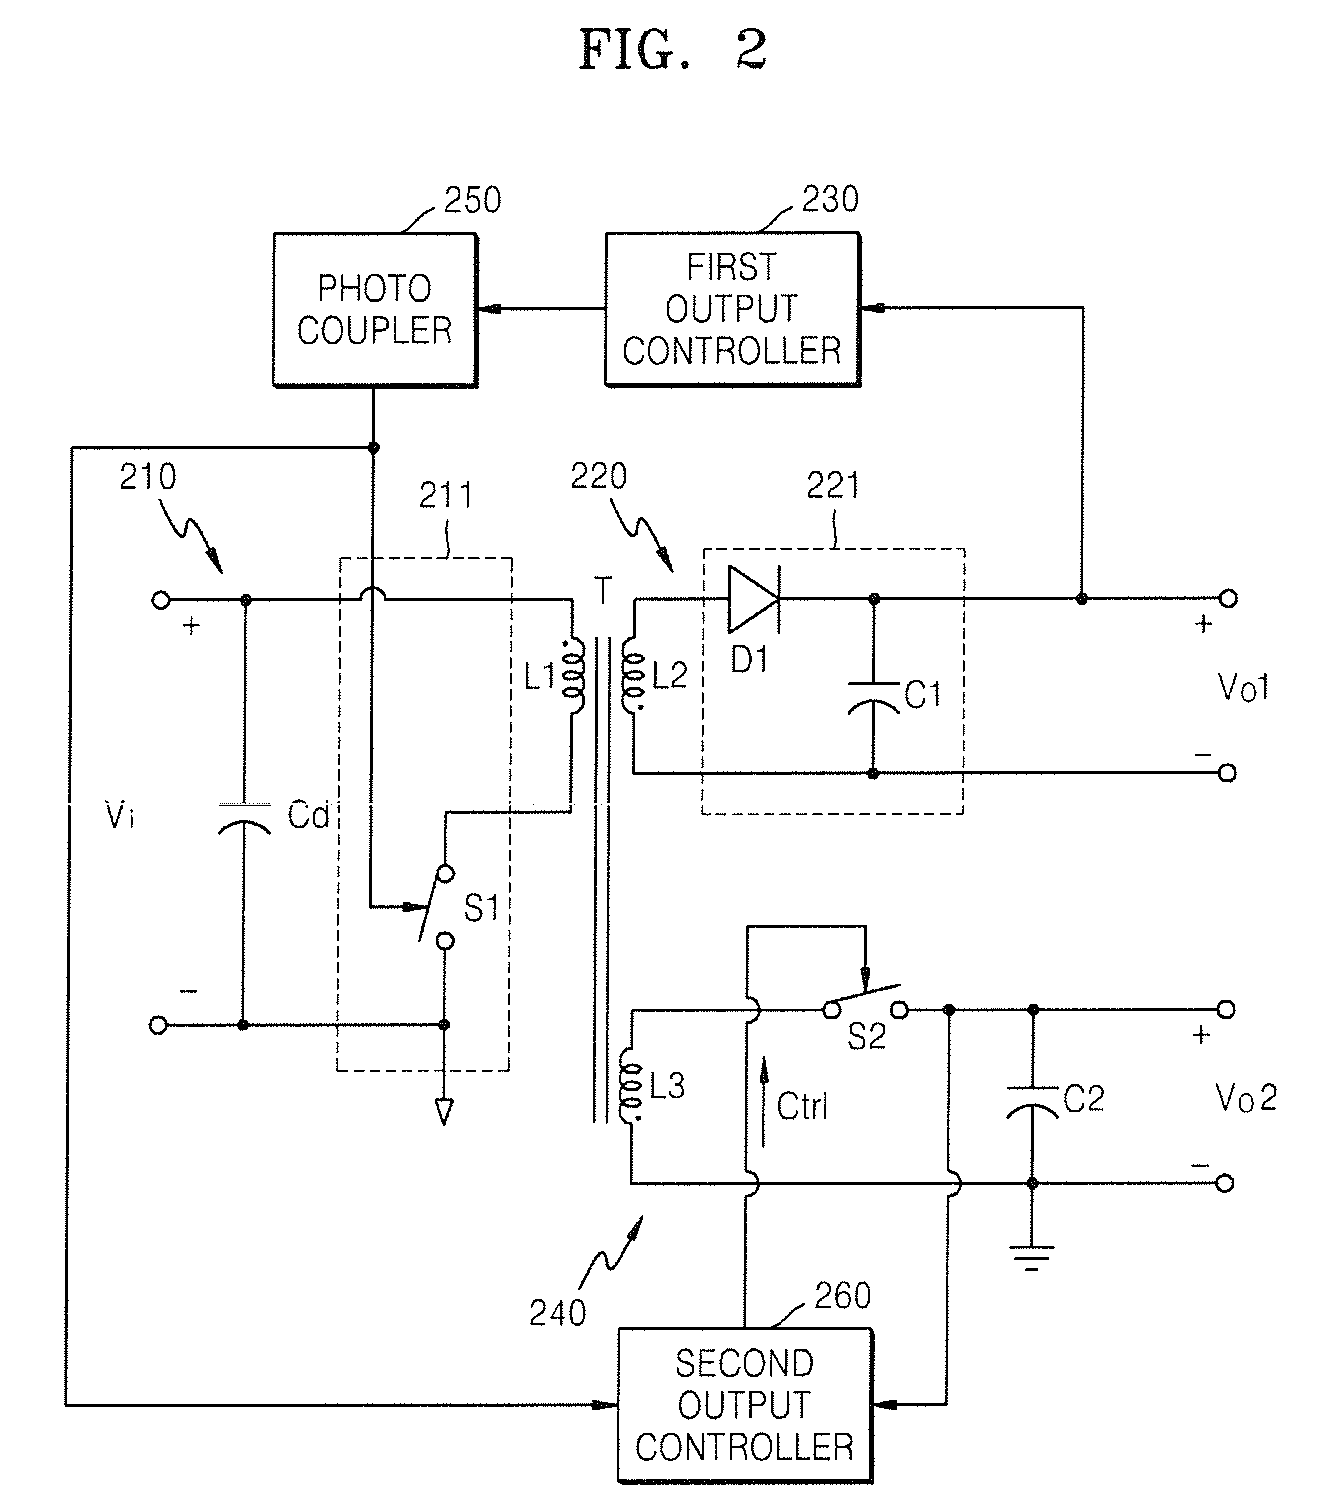 Power supply apparatus having multiple outputs